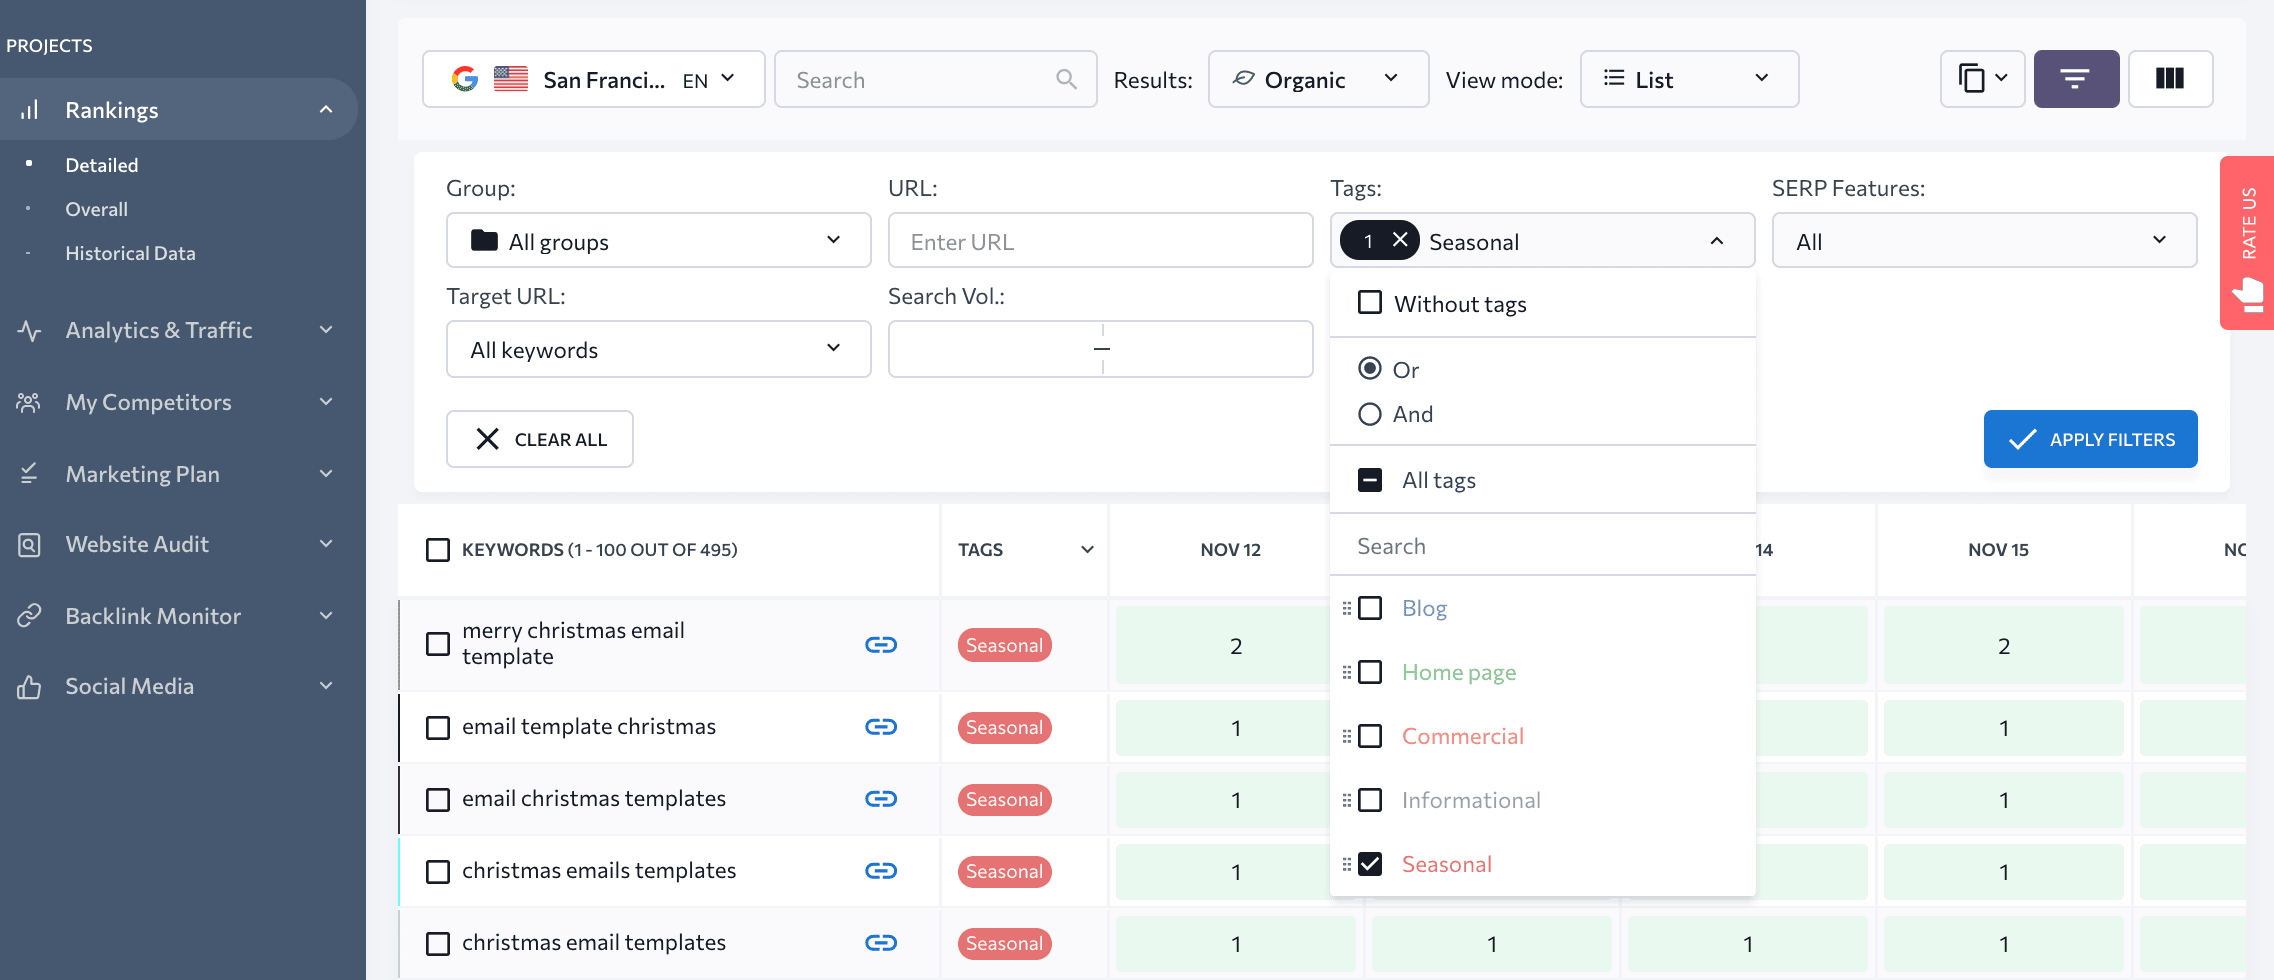 Filter the Rankings table by tag